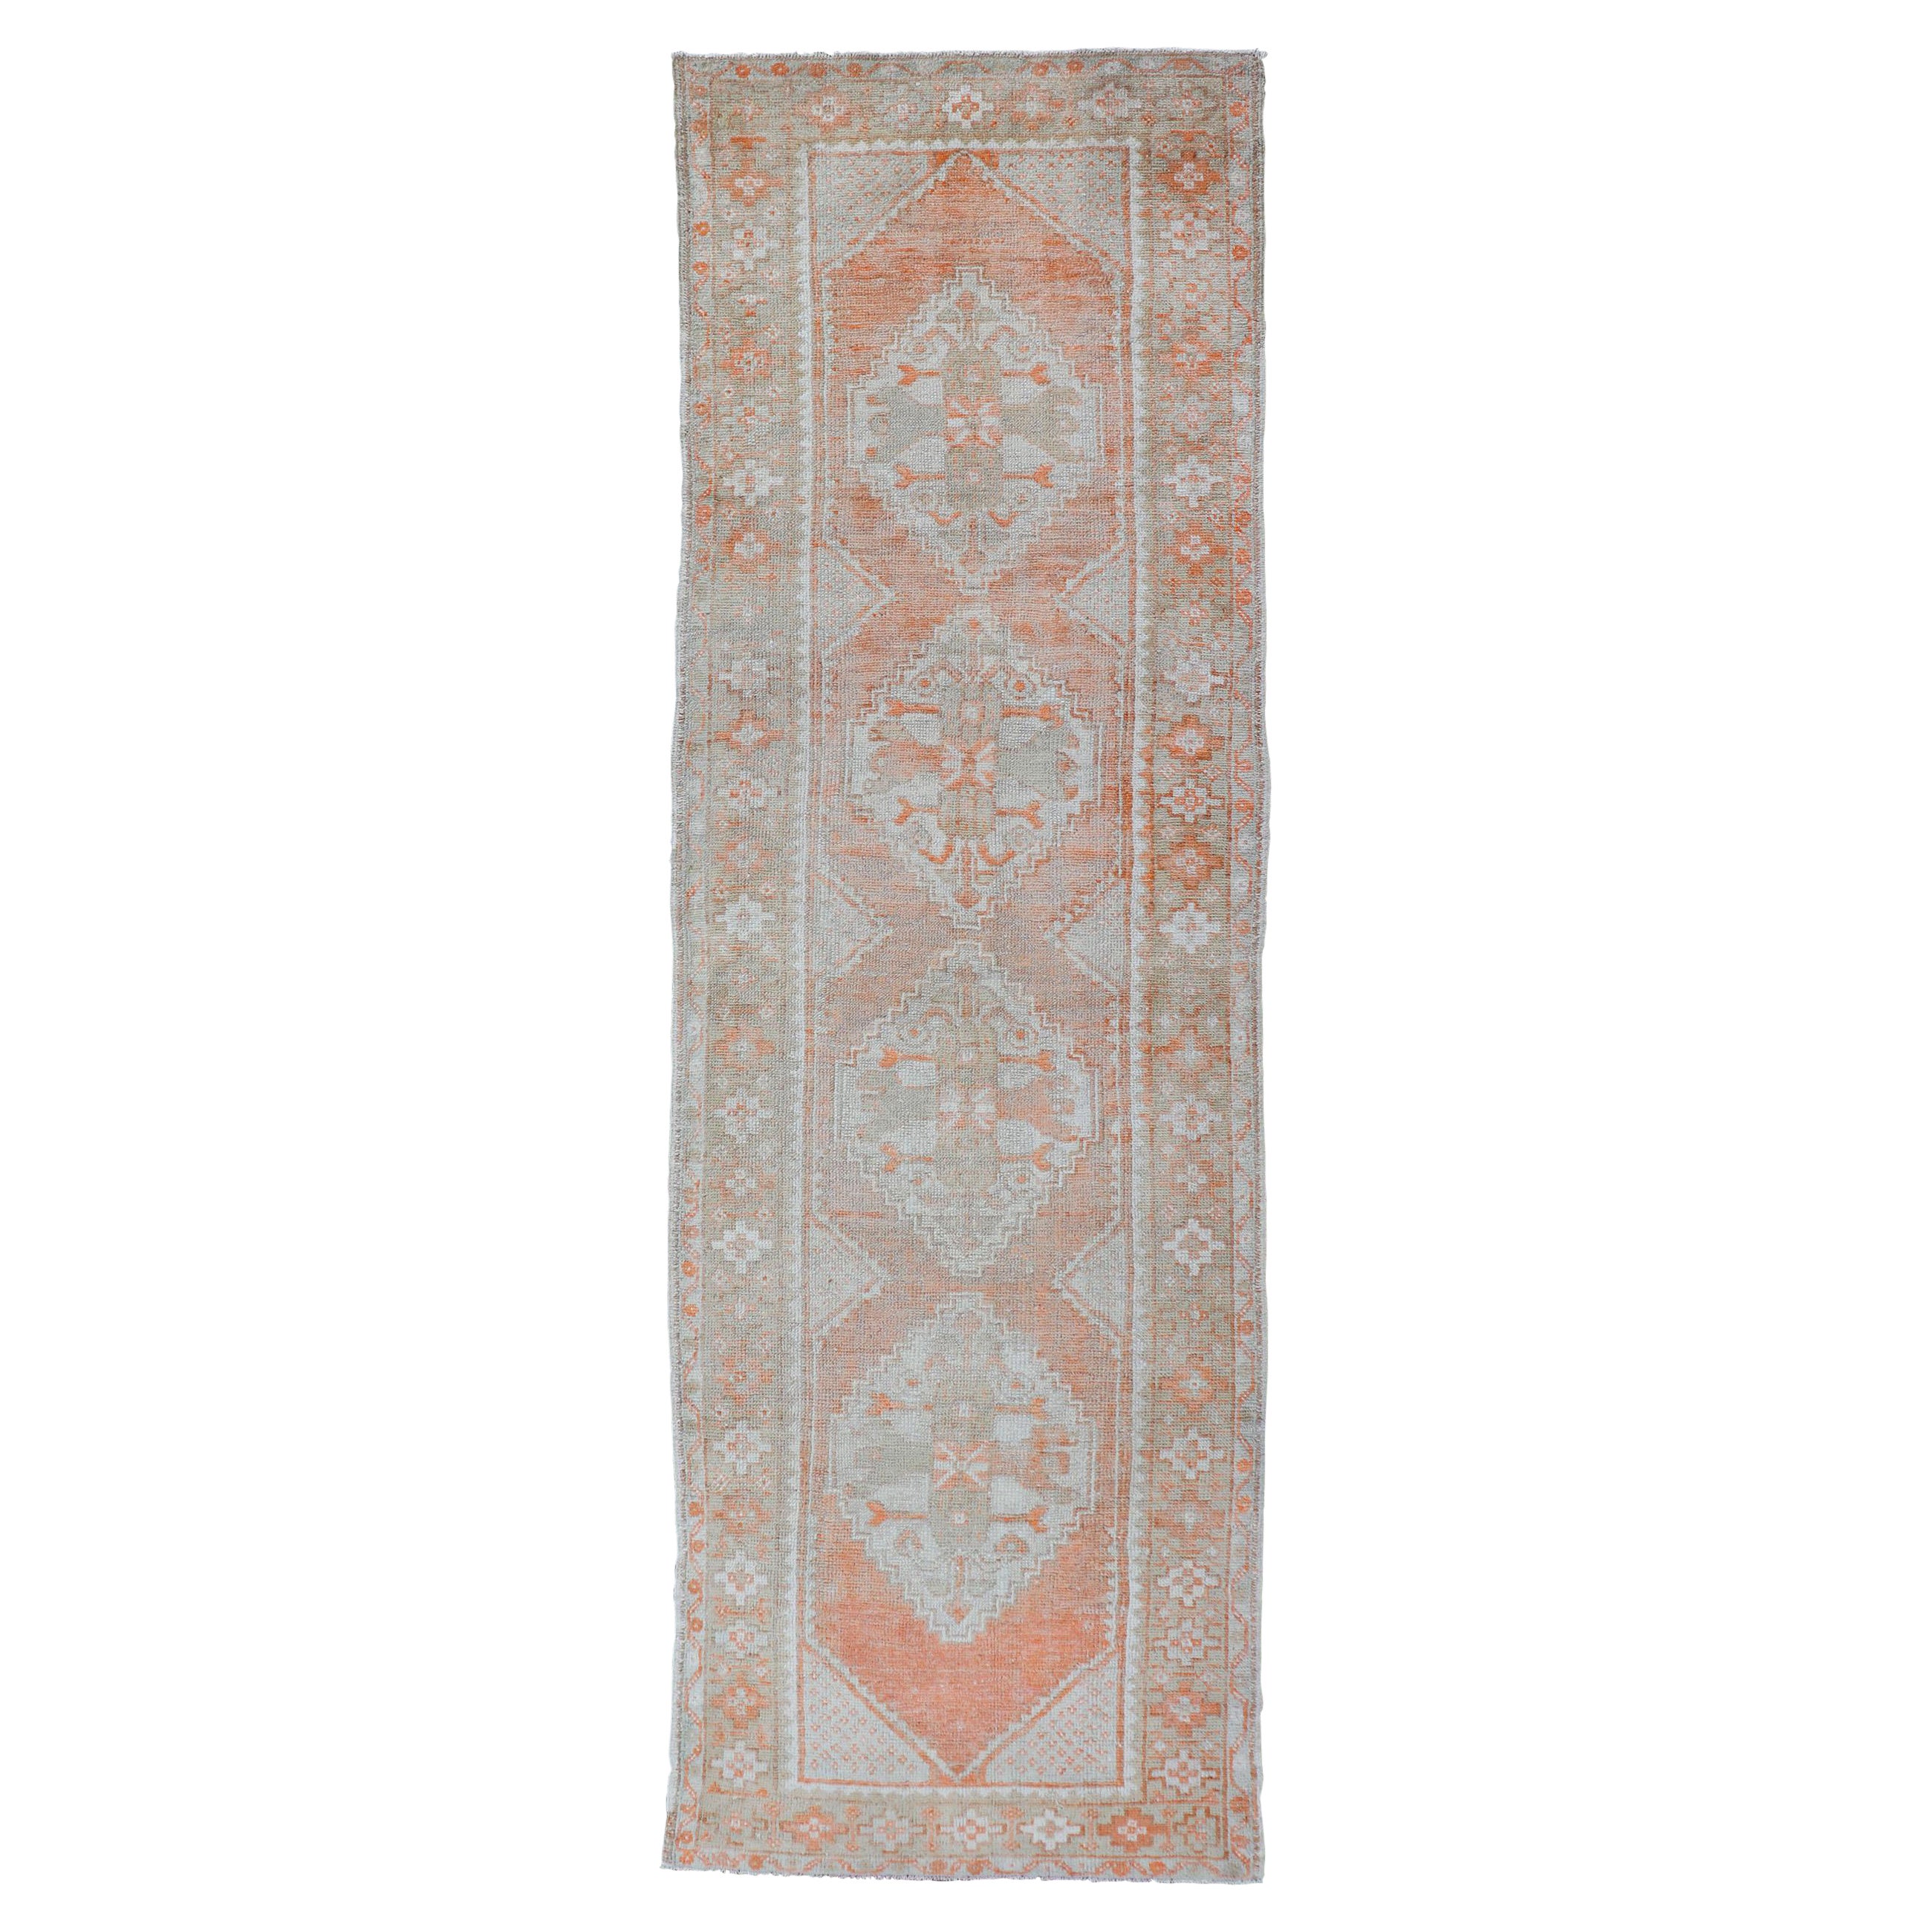 Antique Turkish Oushak Runner with Diamond Medallions and Floral Motifs For Sale